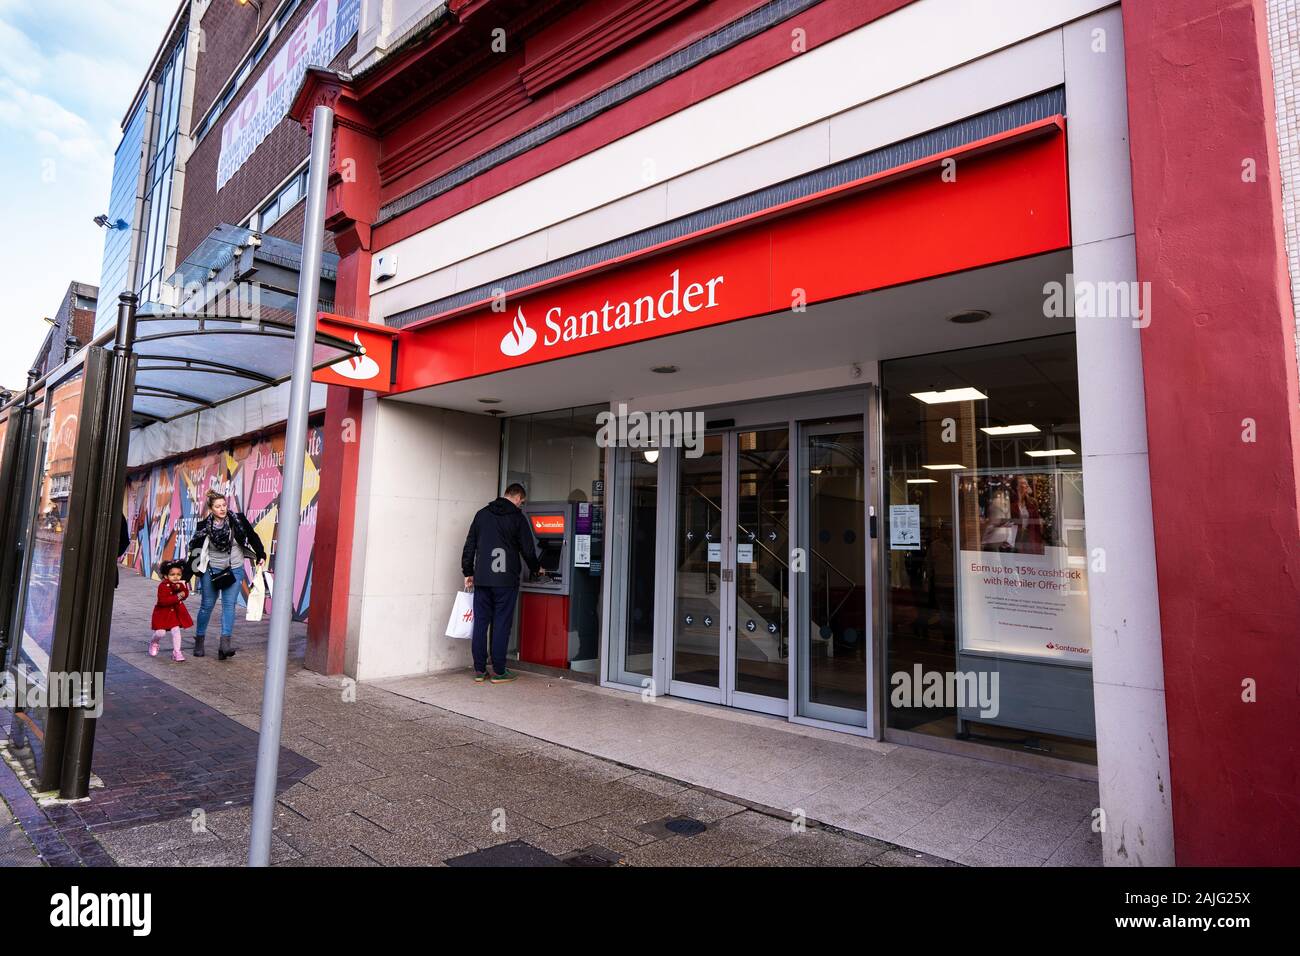 The Santander bank on the high street in the heart of the city centre of Hanley, Stoke on Trent, Staffordshire Stock Photo